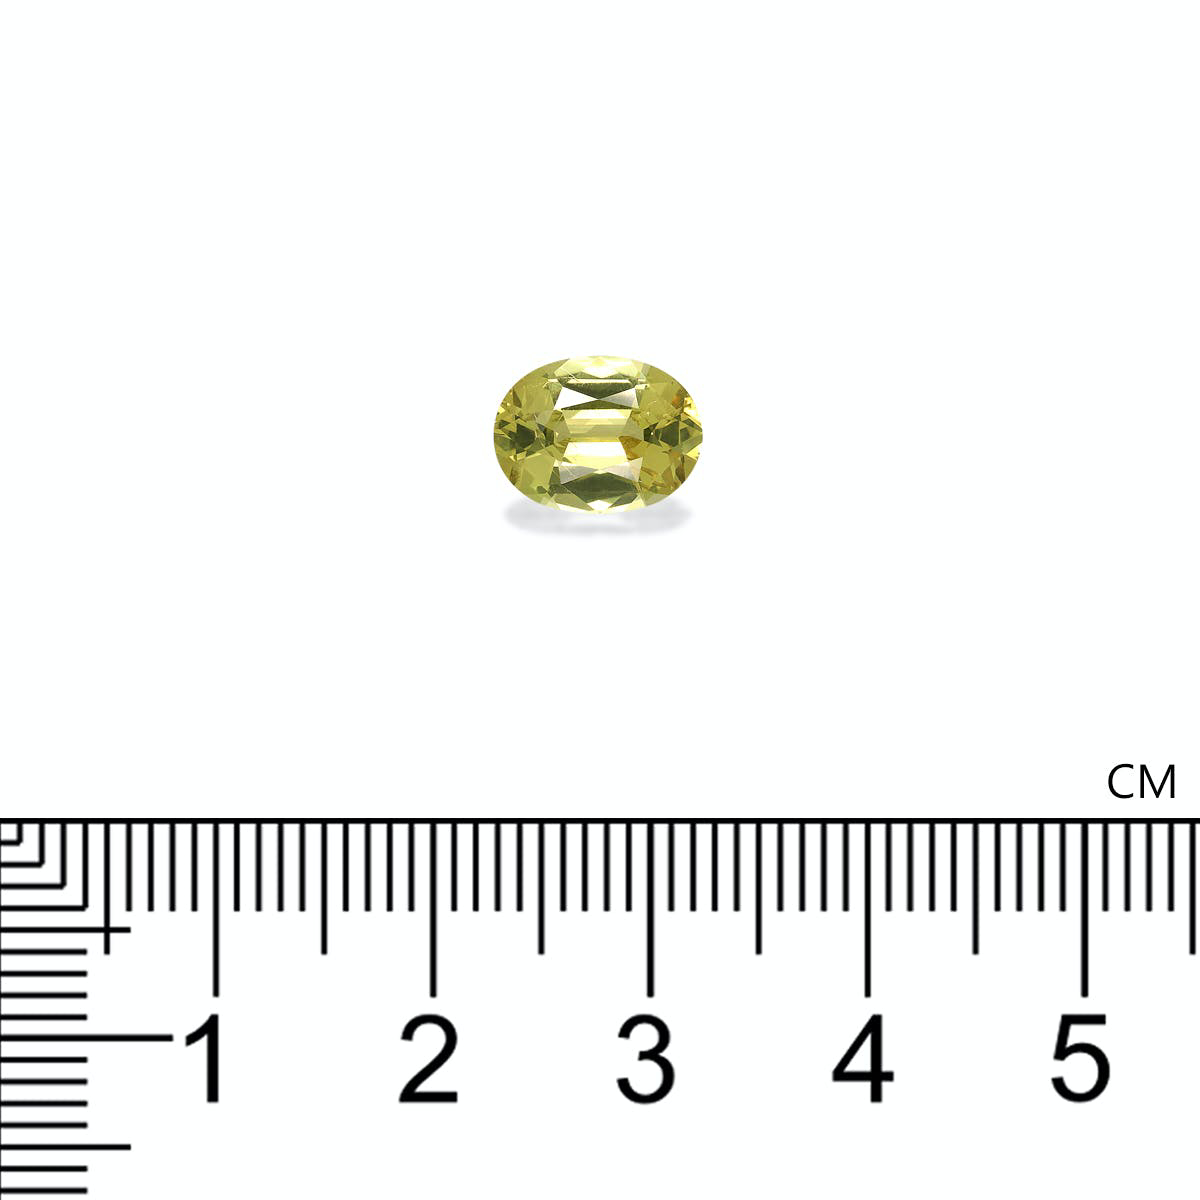 Picture of Golden Yellow Chrysoberyl 2.27ct - 9x7mm (CB0169)